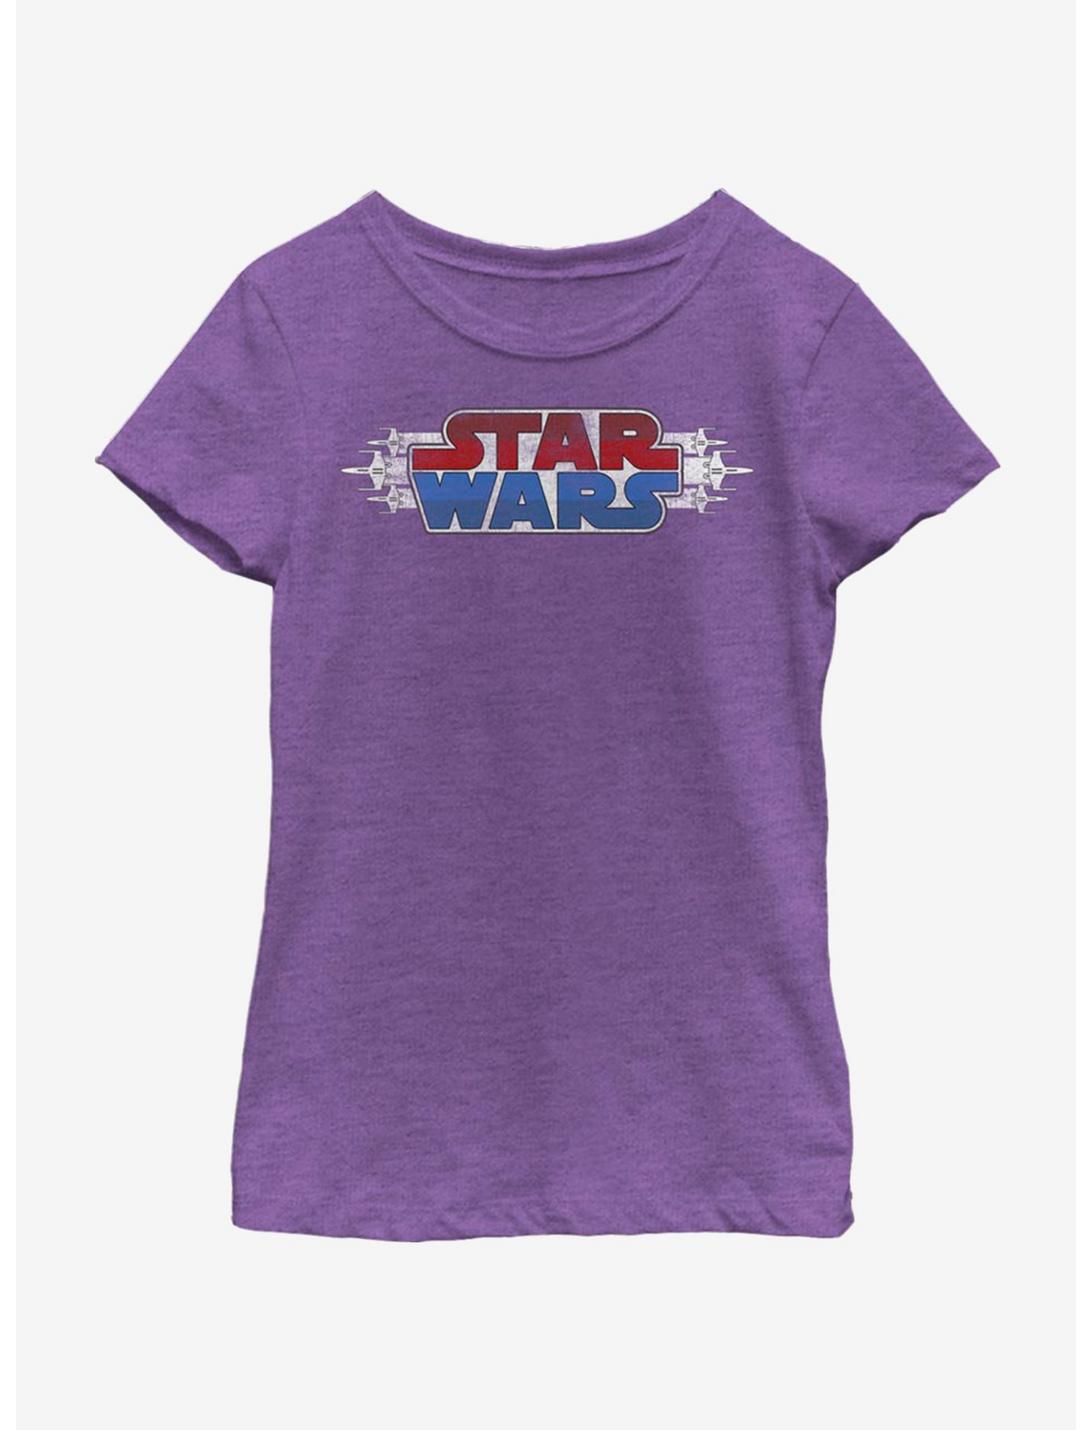 Star Wars Flight For Freedom Youth Girls T-Shirt, PURPLE BERRY, hi-res